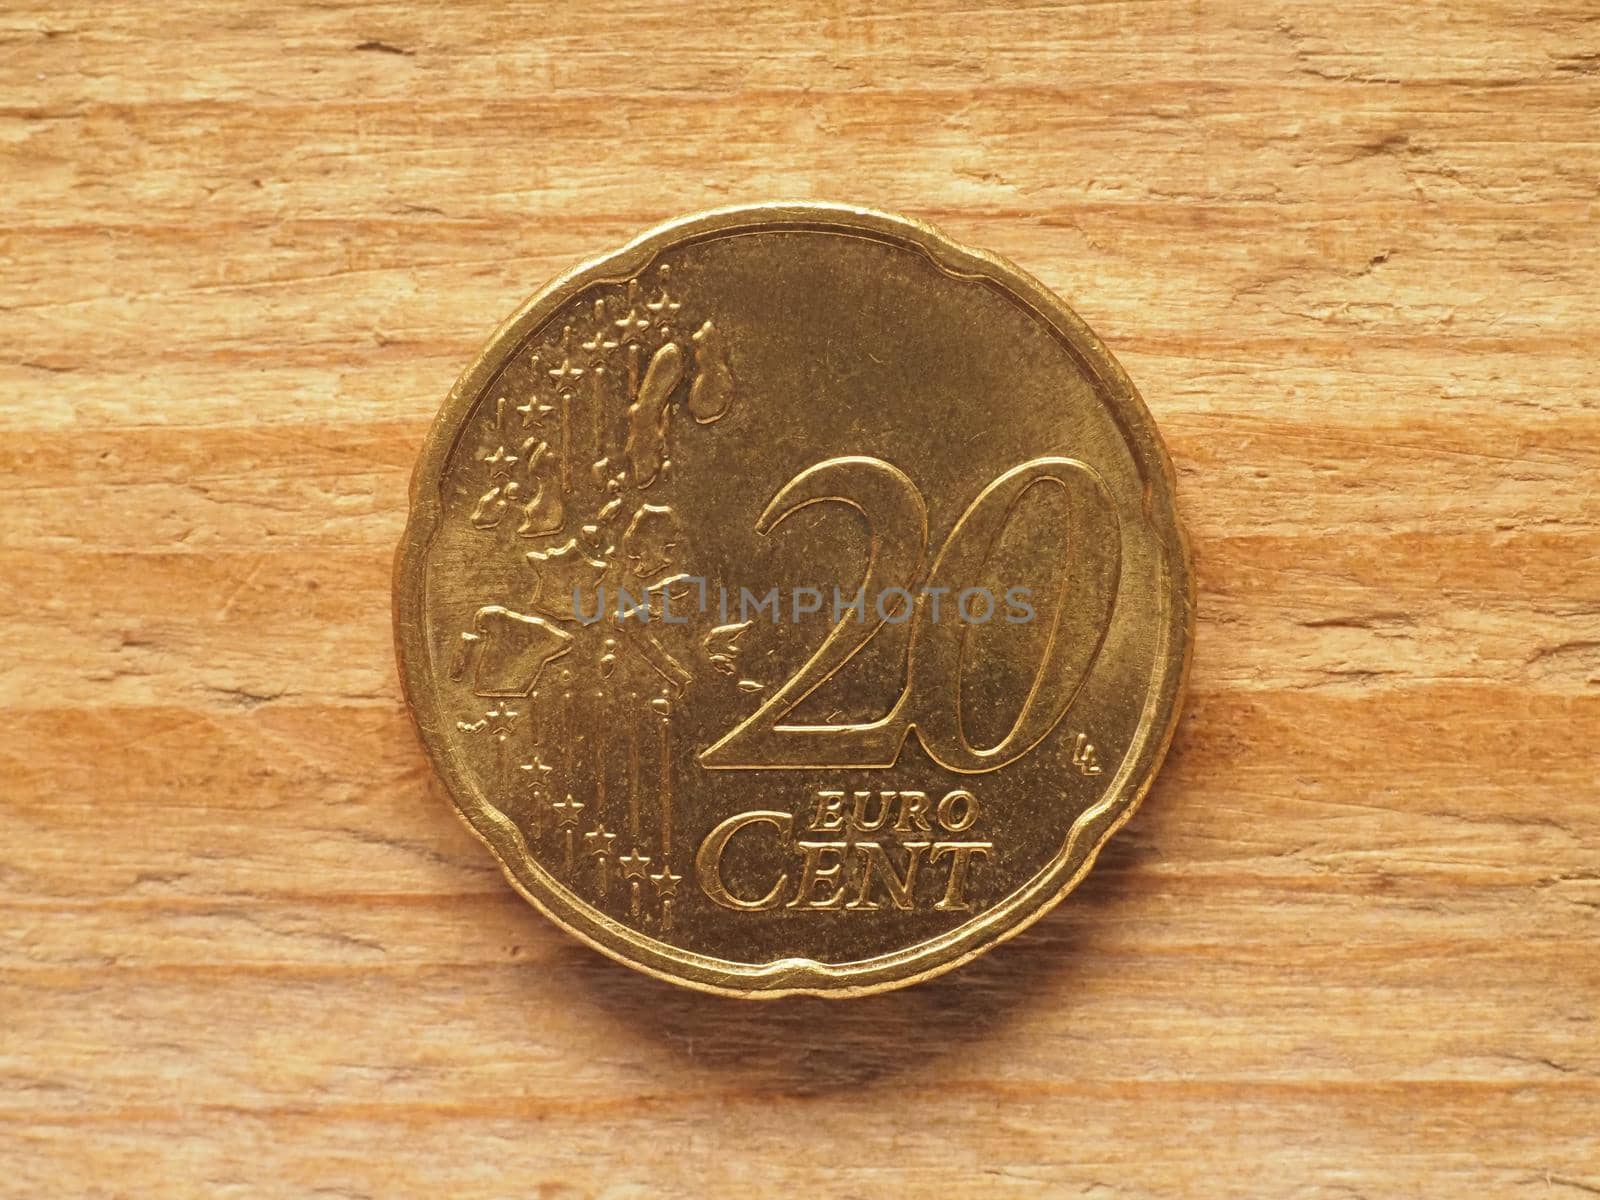 20 cents coin common side, currency of Europe by claudiodivizia